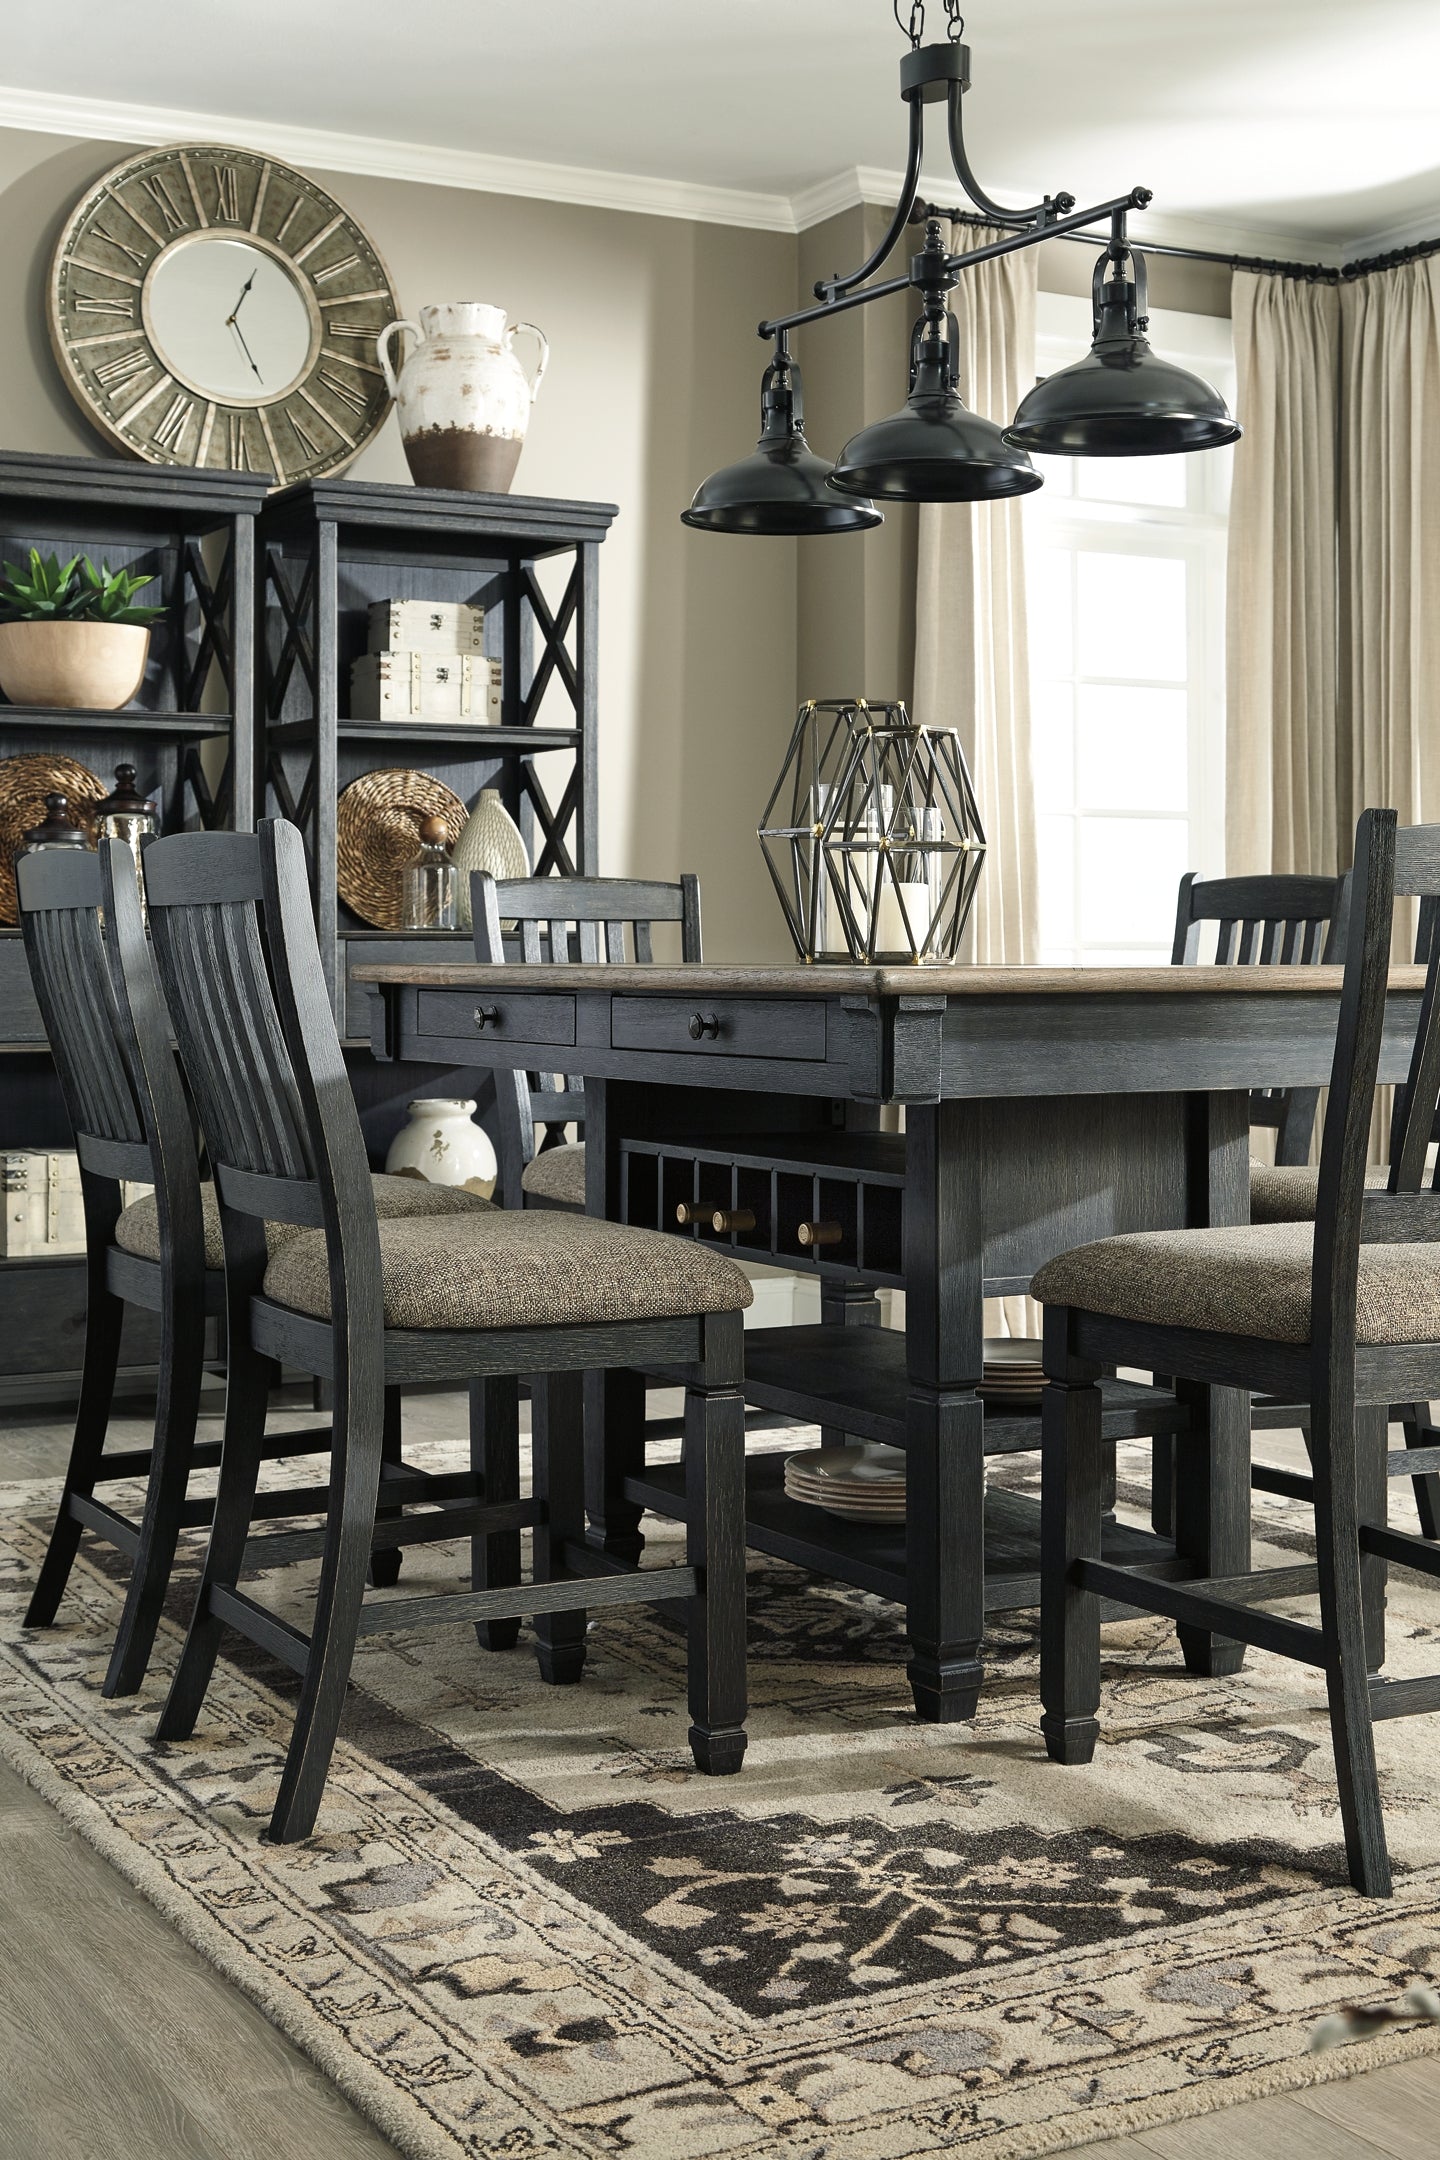 Tyler Creek Counter Height Dining Table and 4 Barstools at Walker Mattress and Furniture Locations in Cedar Park and Belton TX.